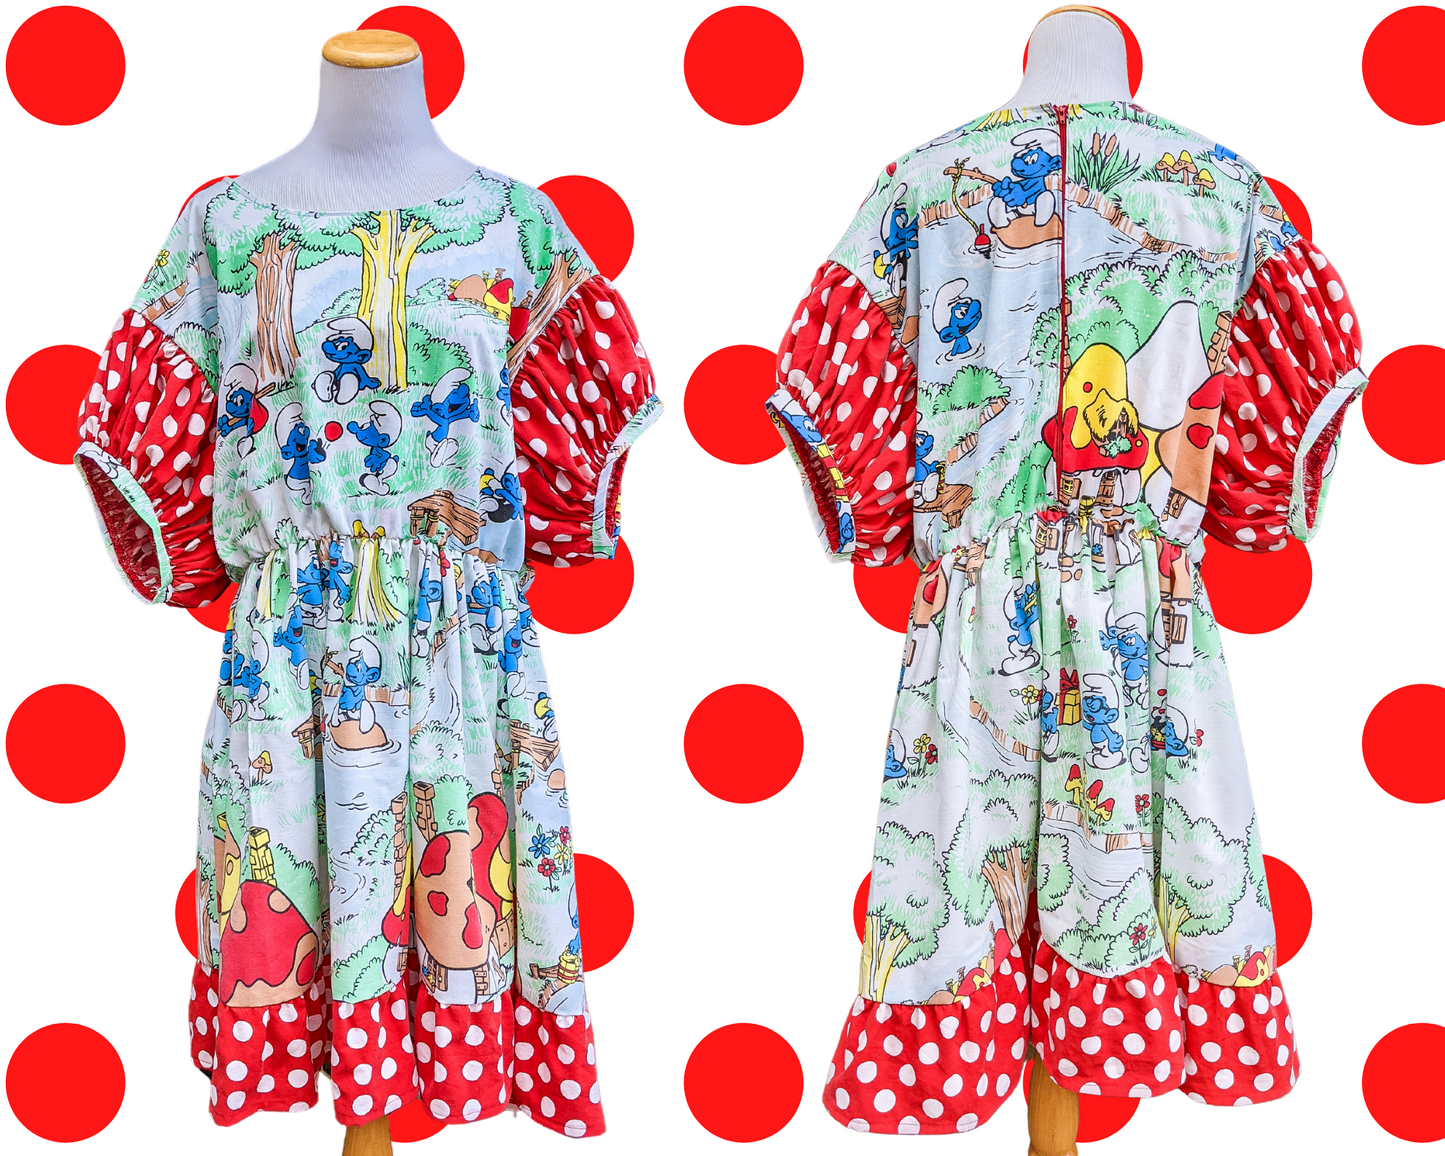 Handmade, Upcycled The Smurfs Bedsheet Dress with Red and White Polka Dot Fabric, Short Puffy Sleeves Size 2XL